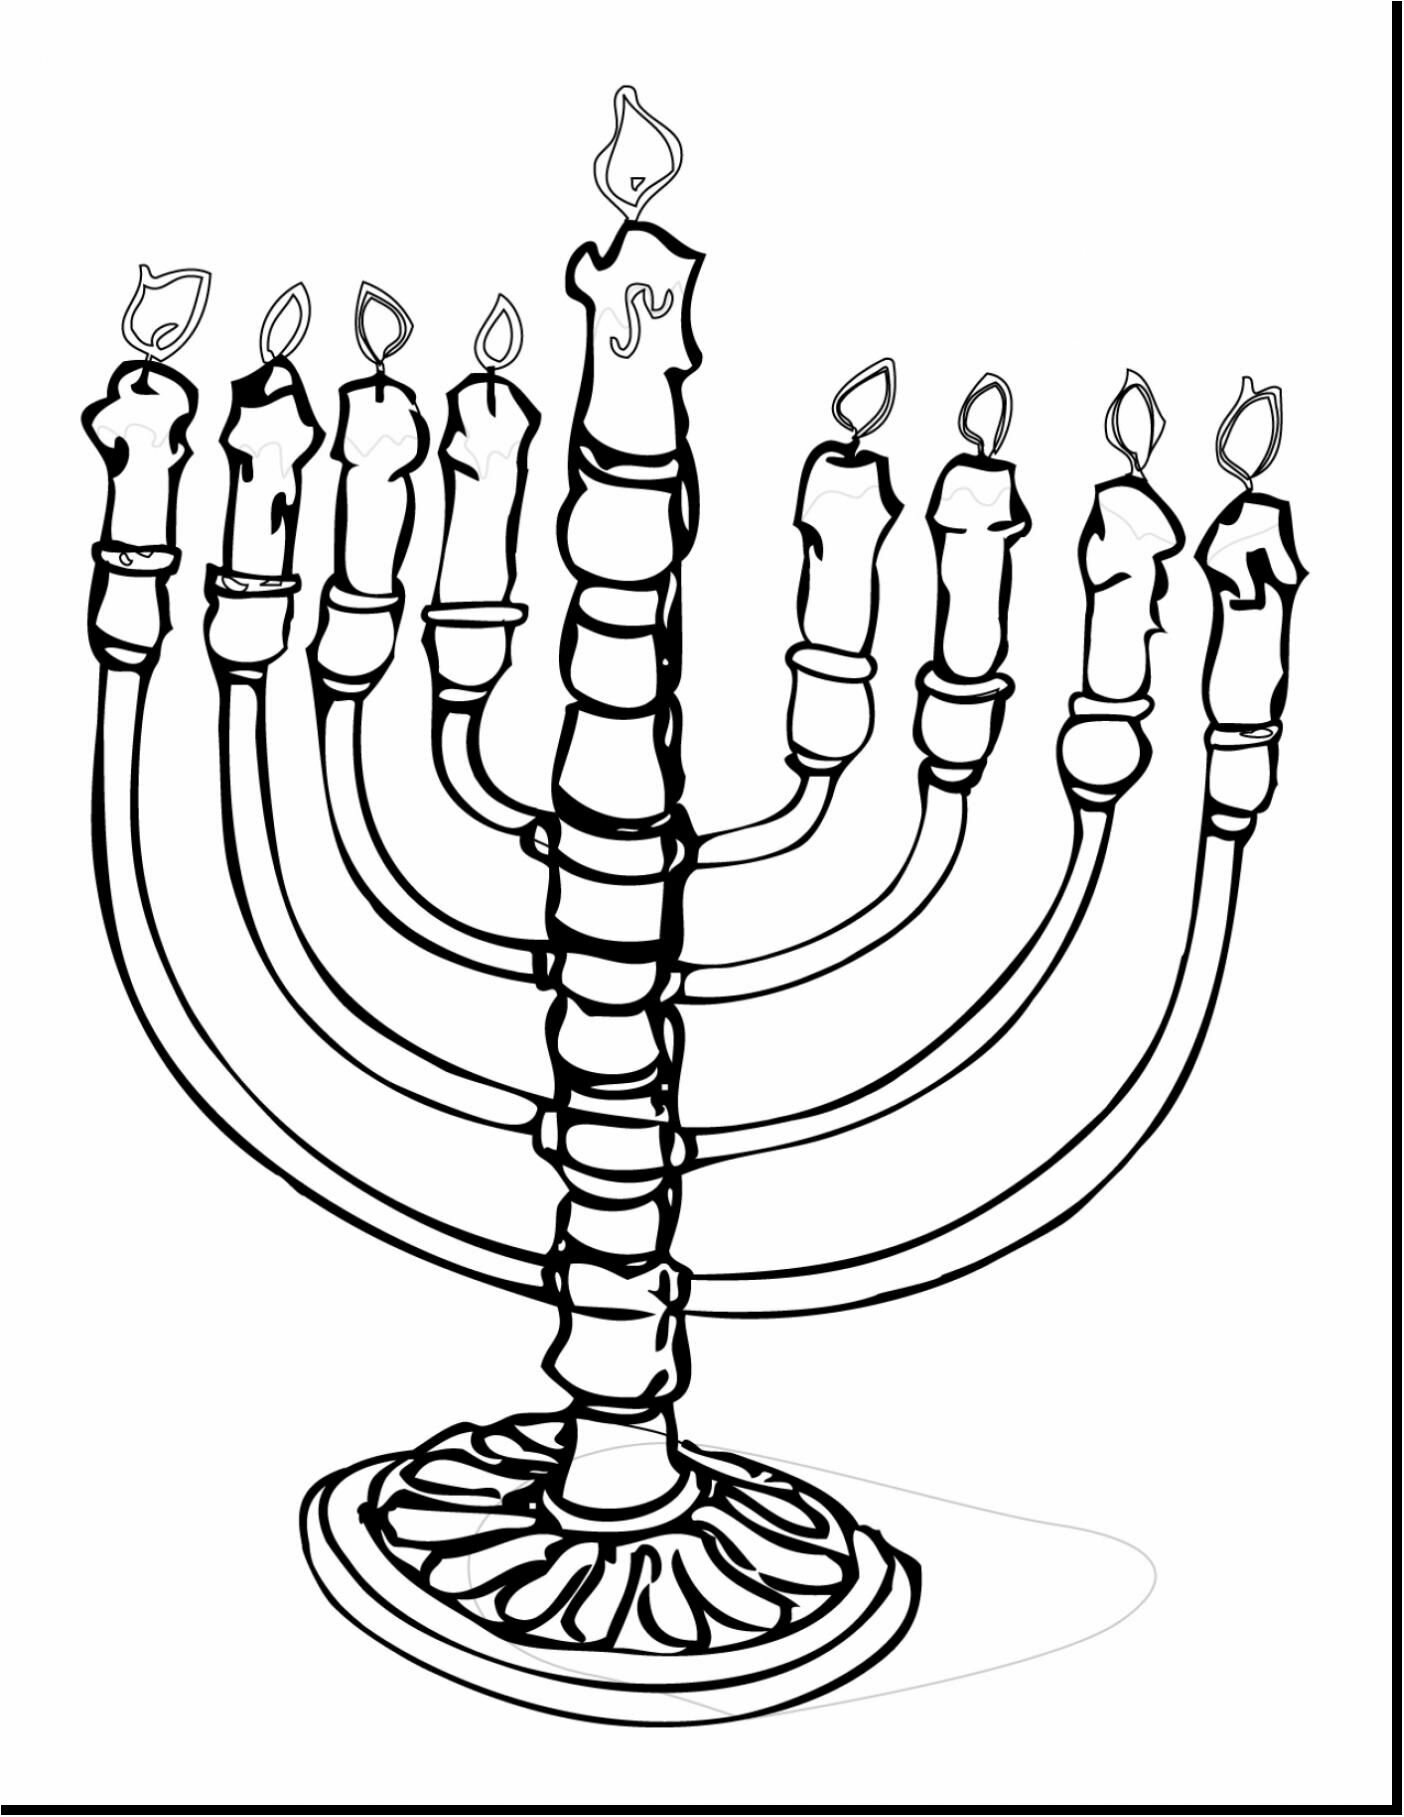 nice Best Of Jewish Holidays Coloring Pages Gallery Free Coloring Pages – jewish symbols coloring pages